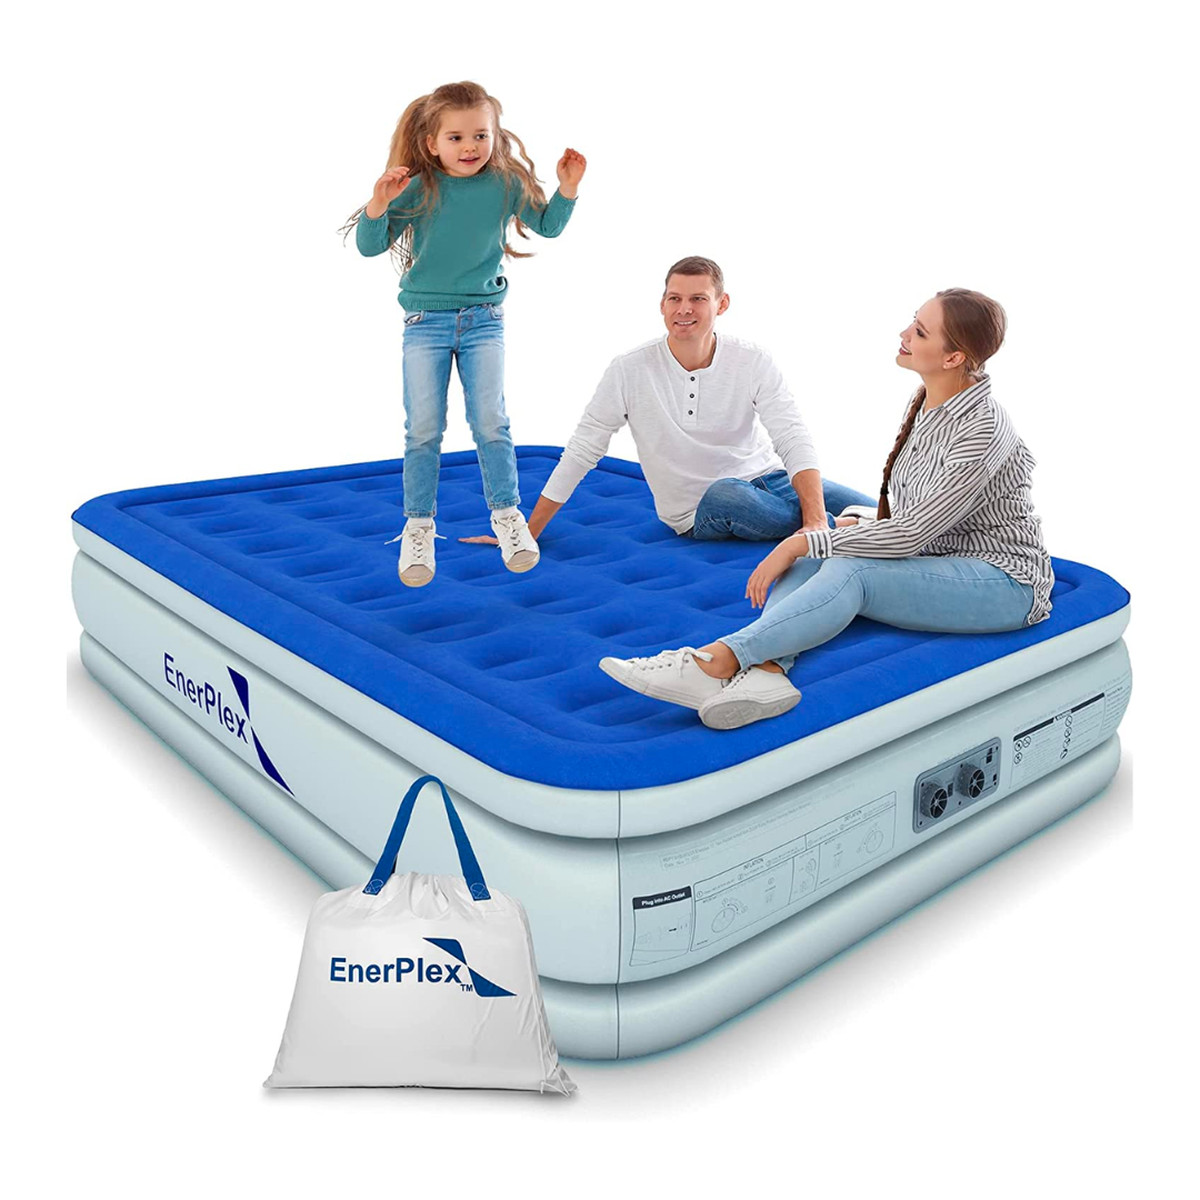 Blue EnerPlex air mattress with family on top